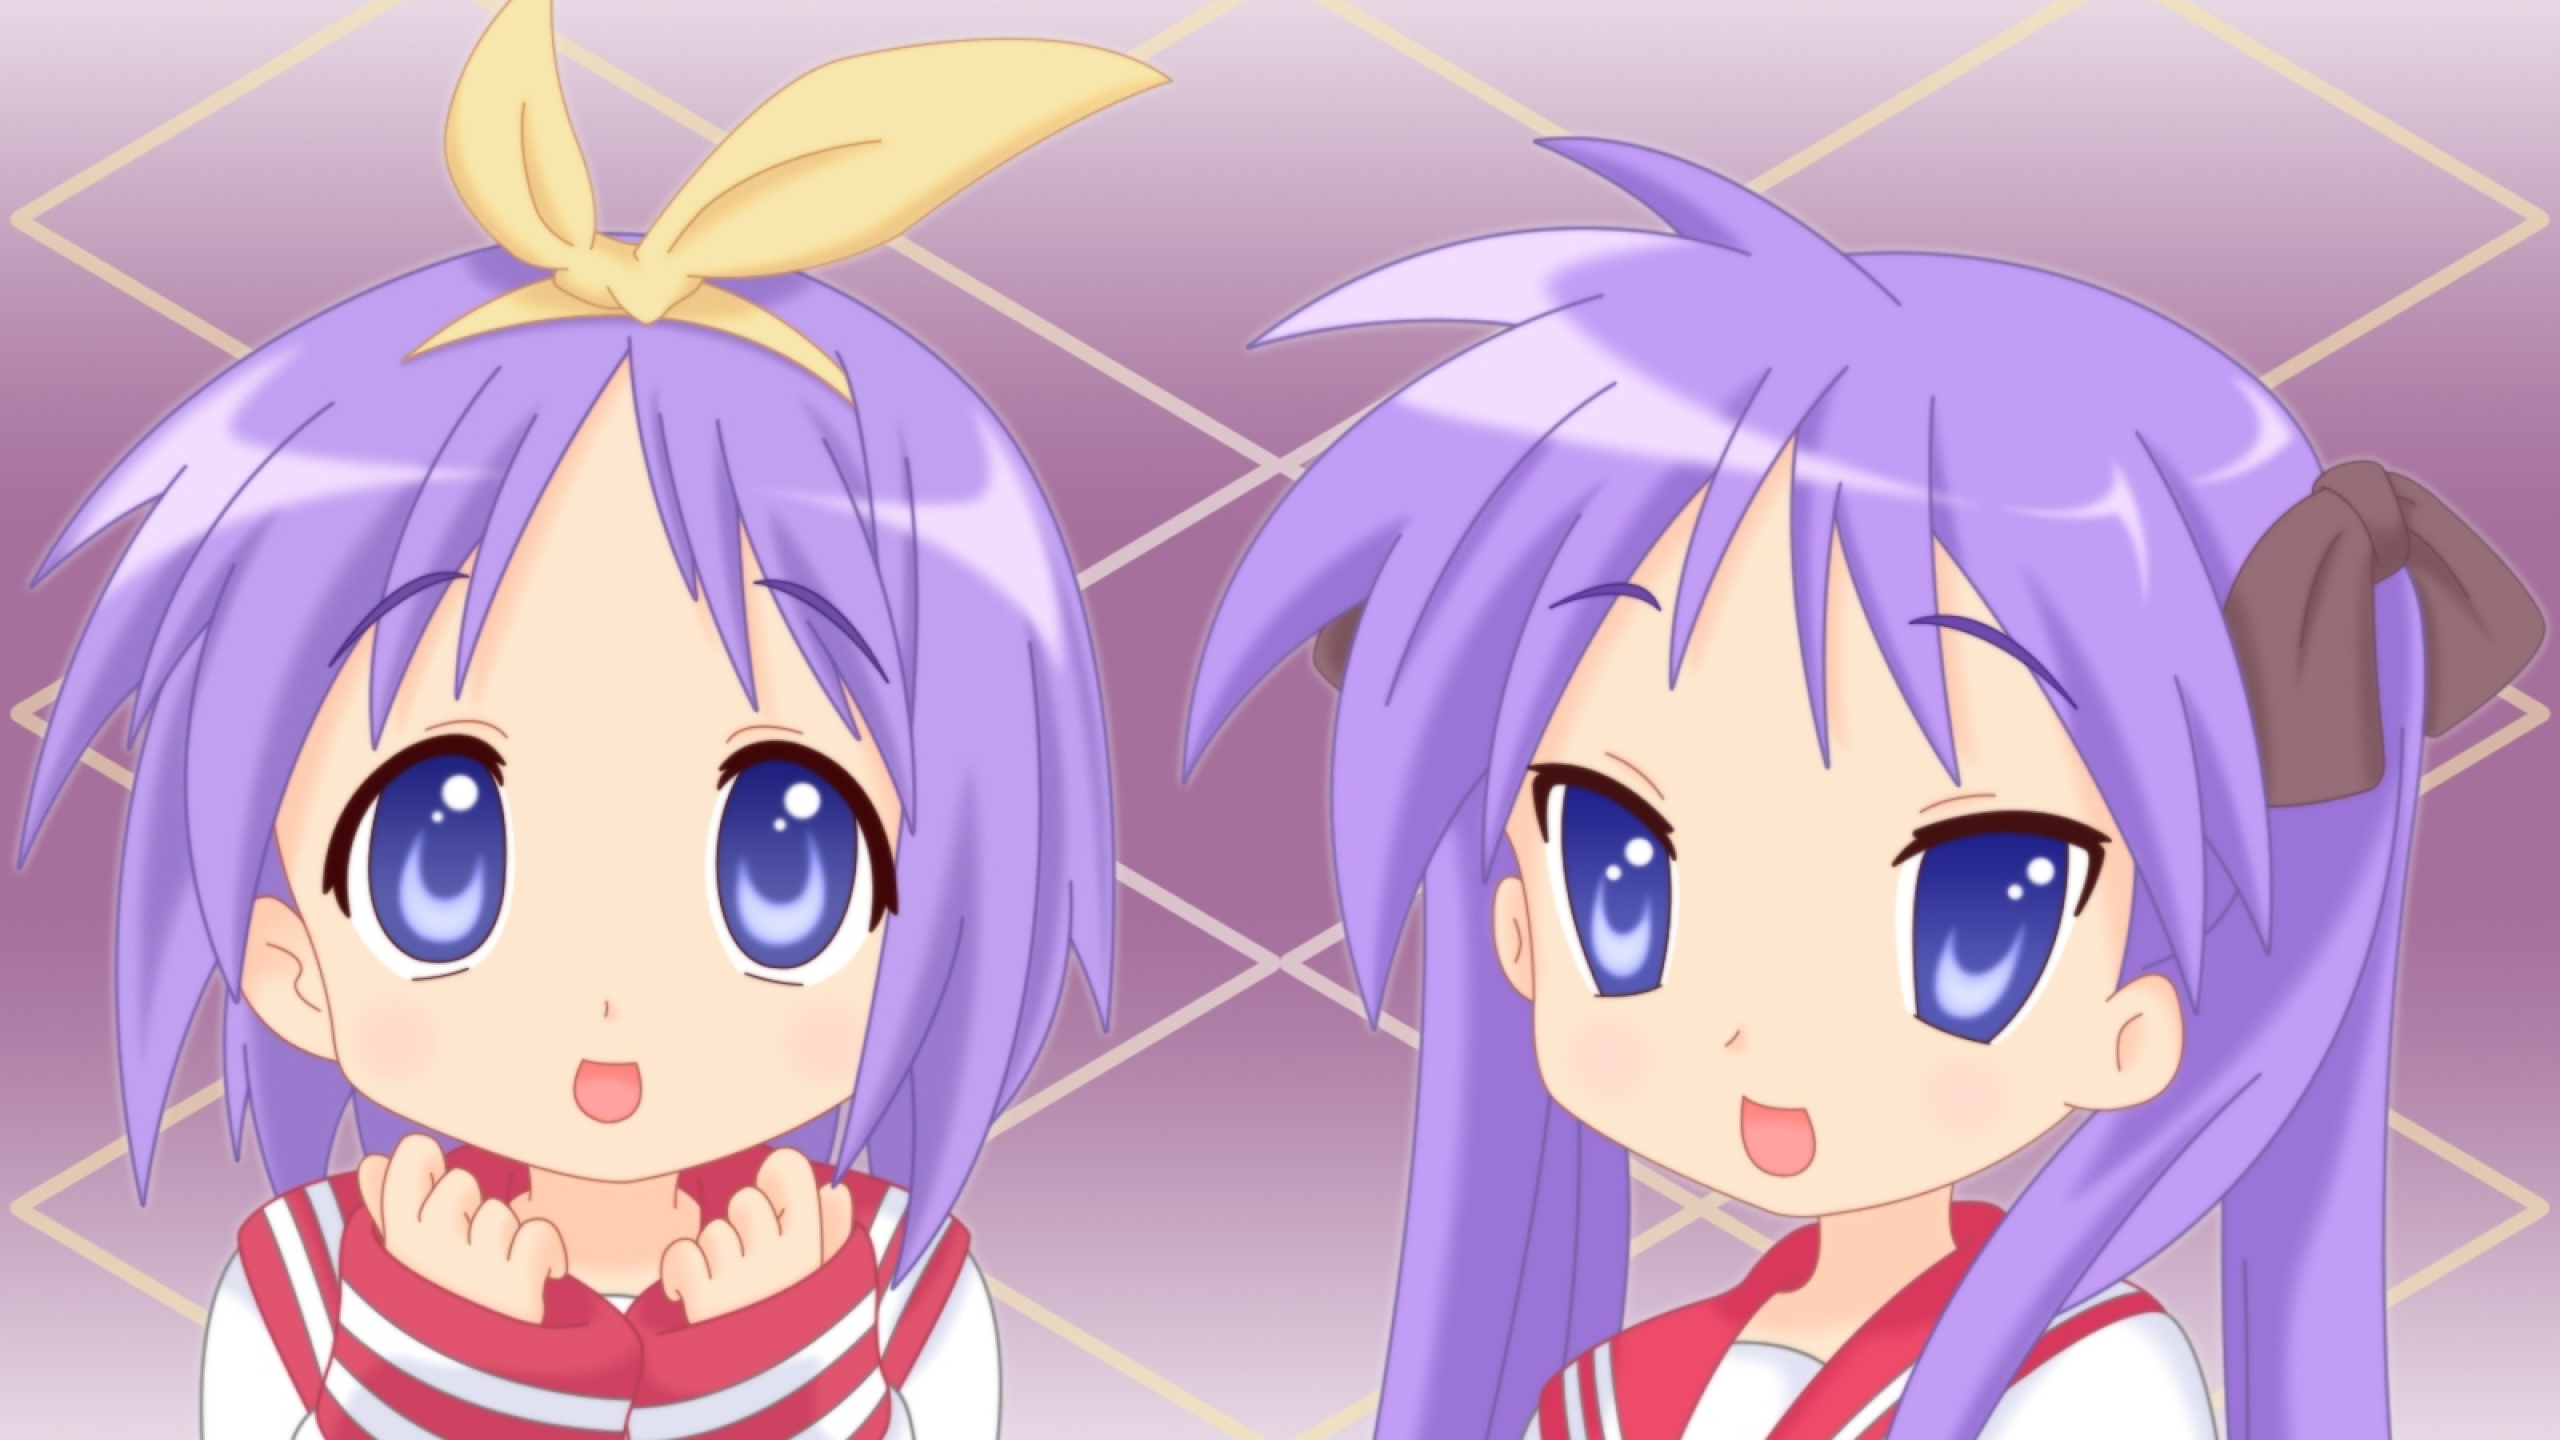 Lucky Star: The Complete Series + OVA [Blu-ray] [8 Discs] - Best Buy